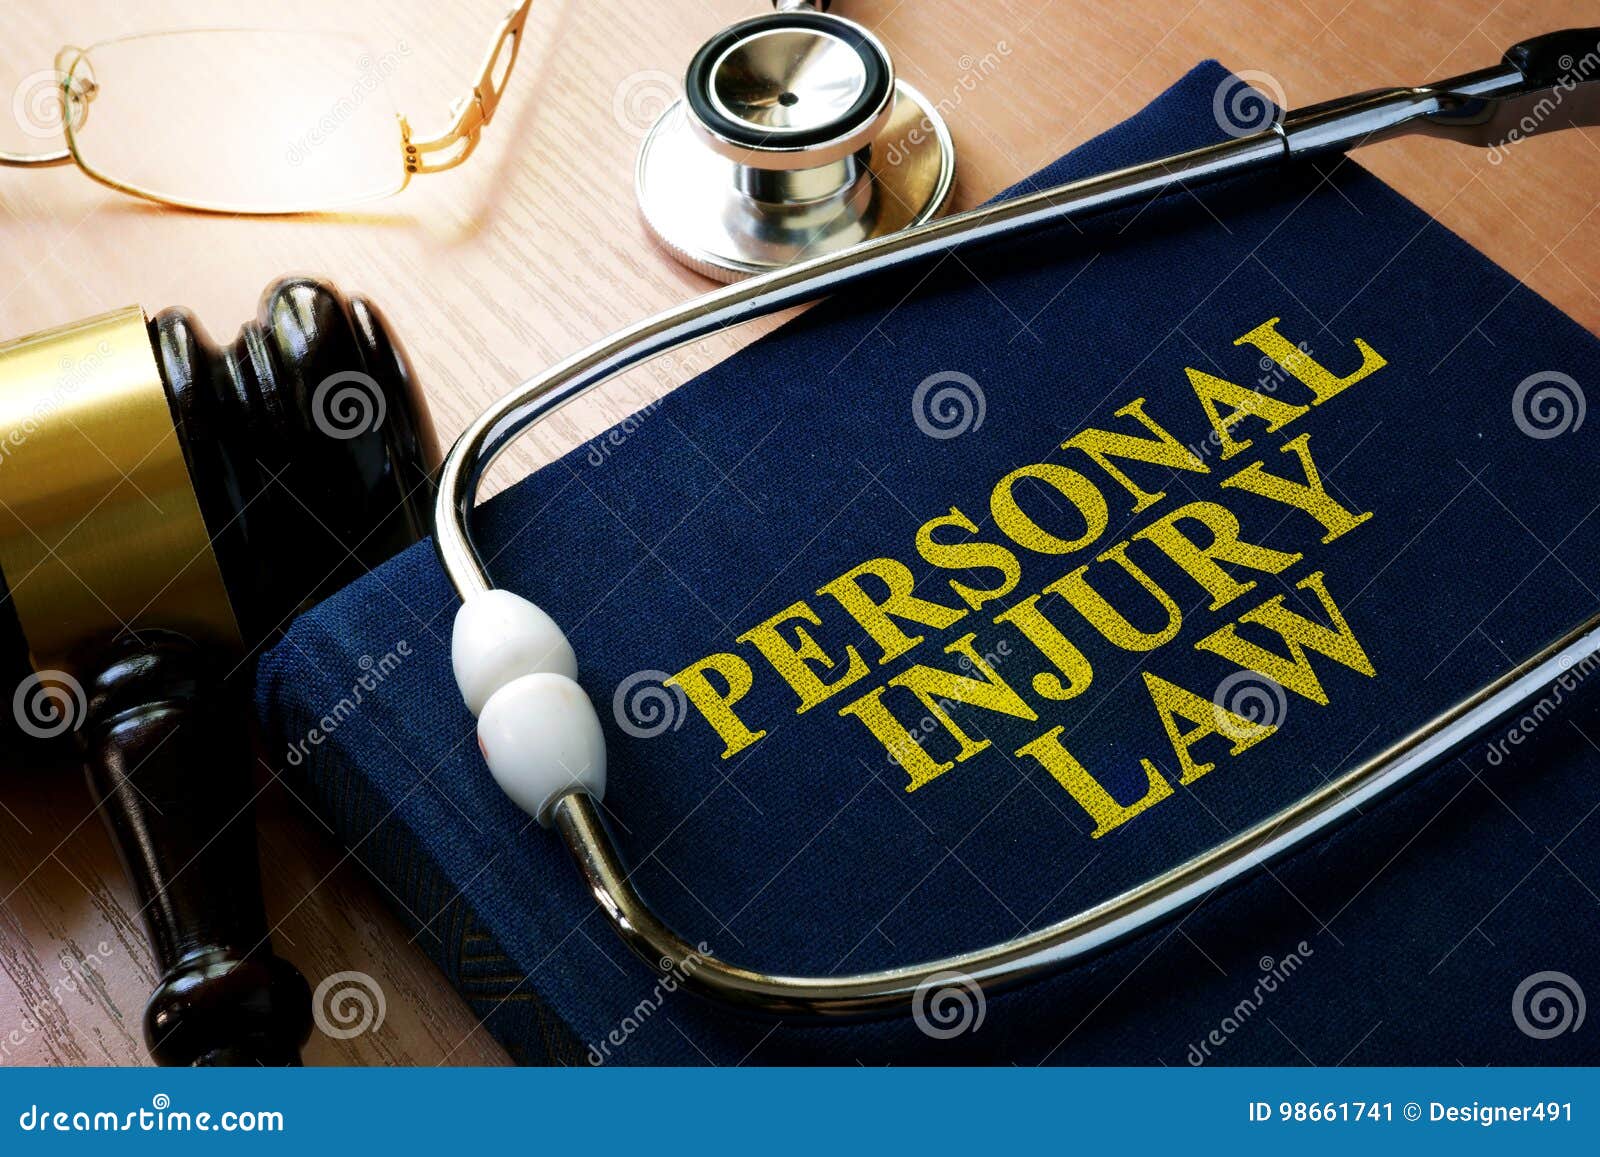 personal injury law concept.